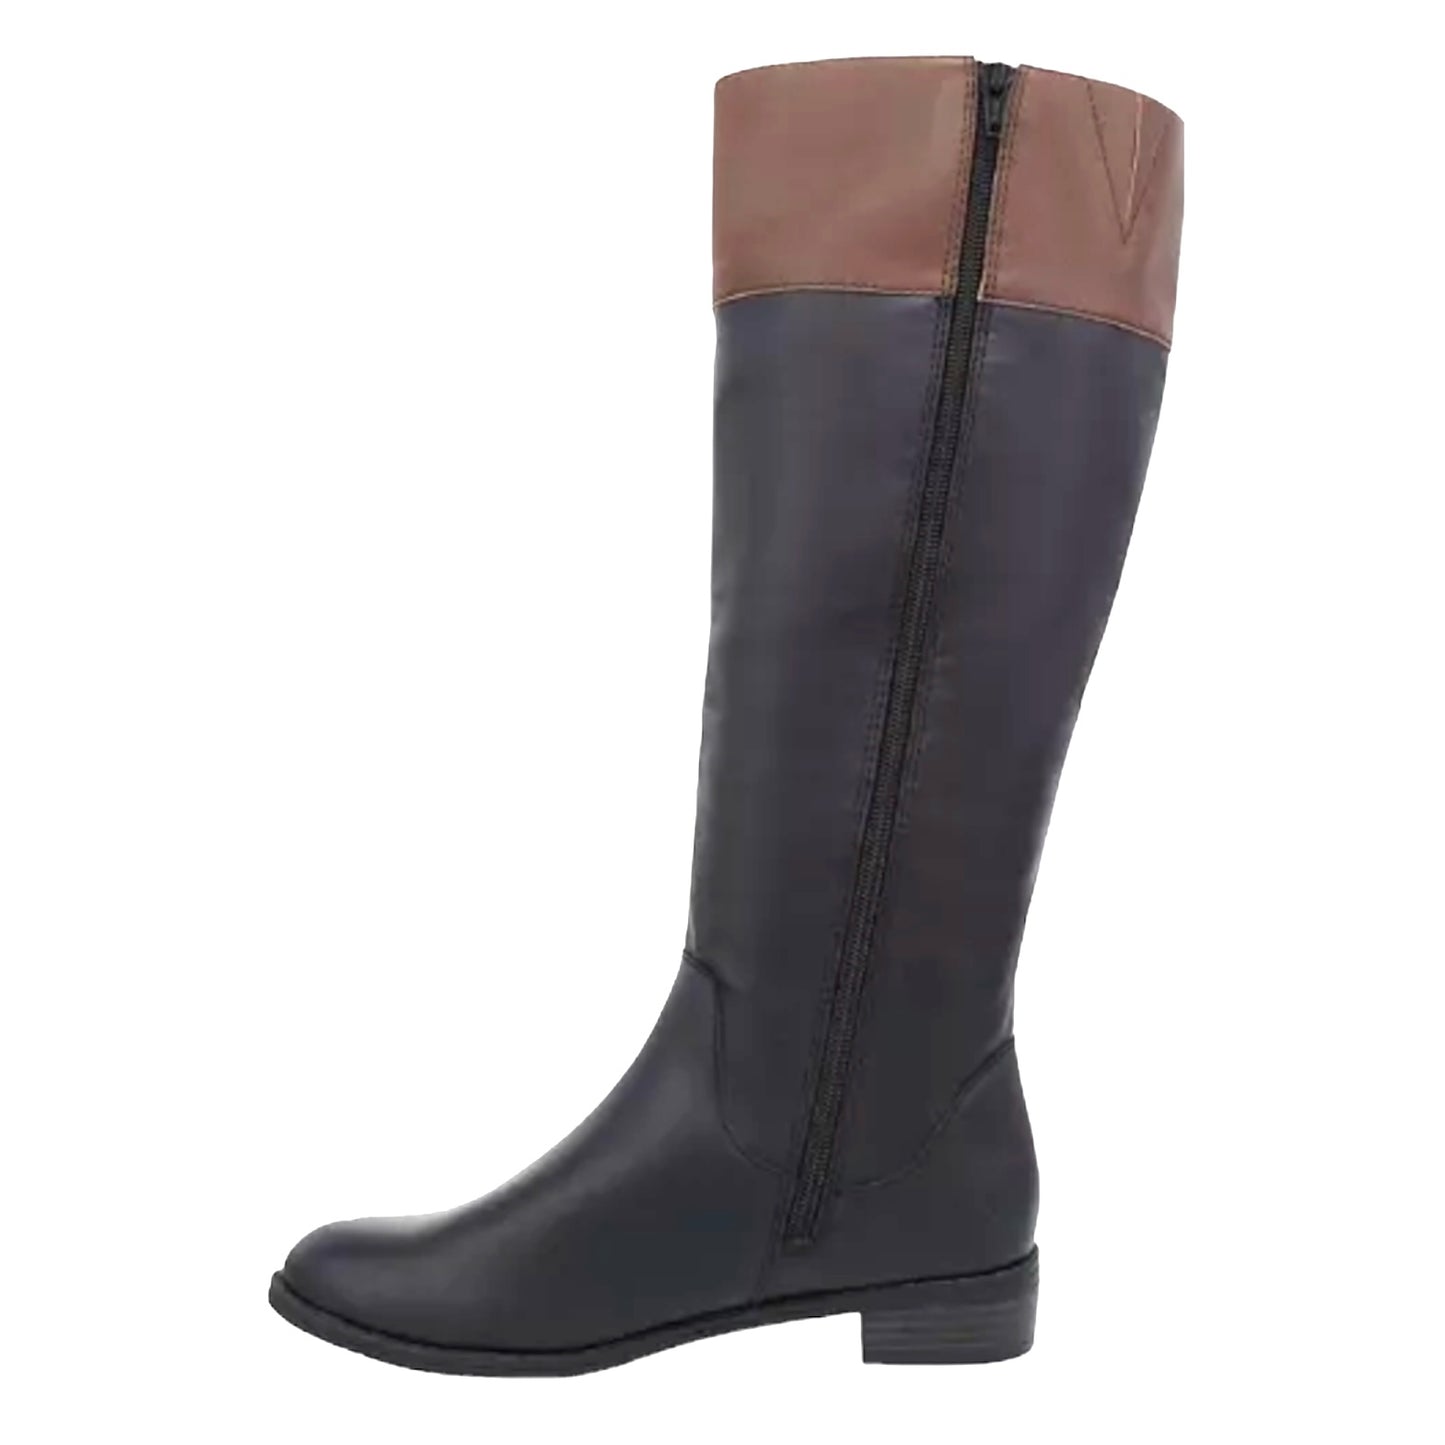 DELIEE2 Riding Boots Knee High Women's Shoes